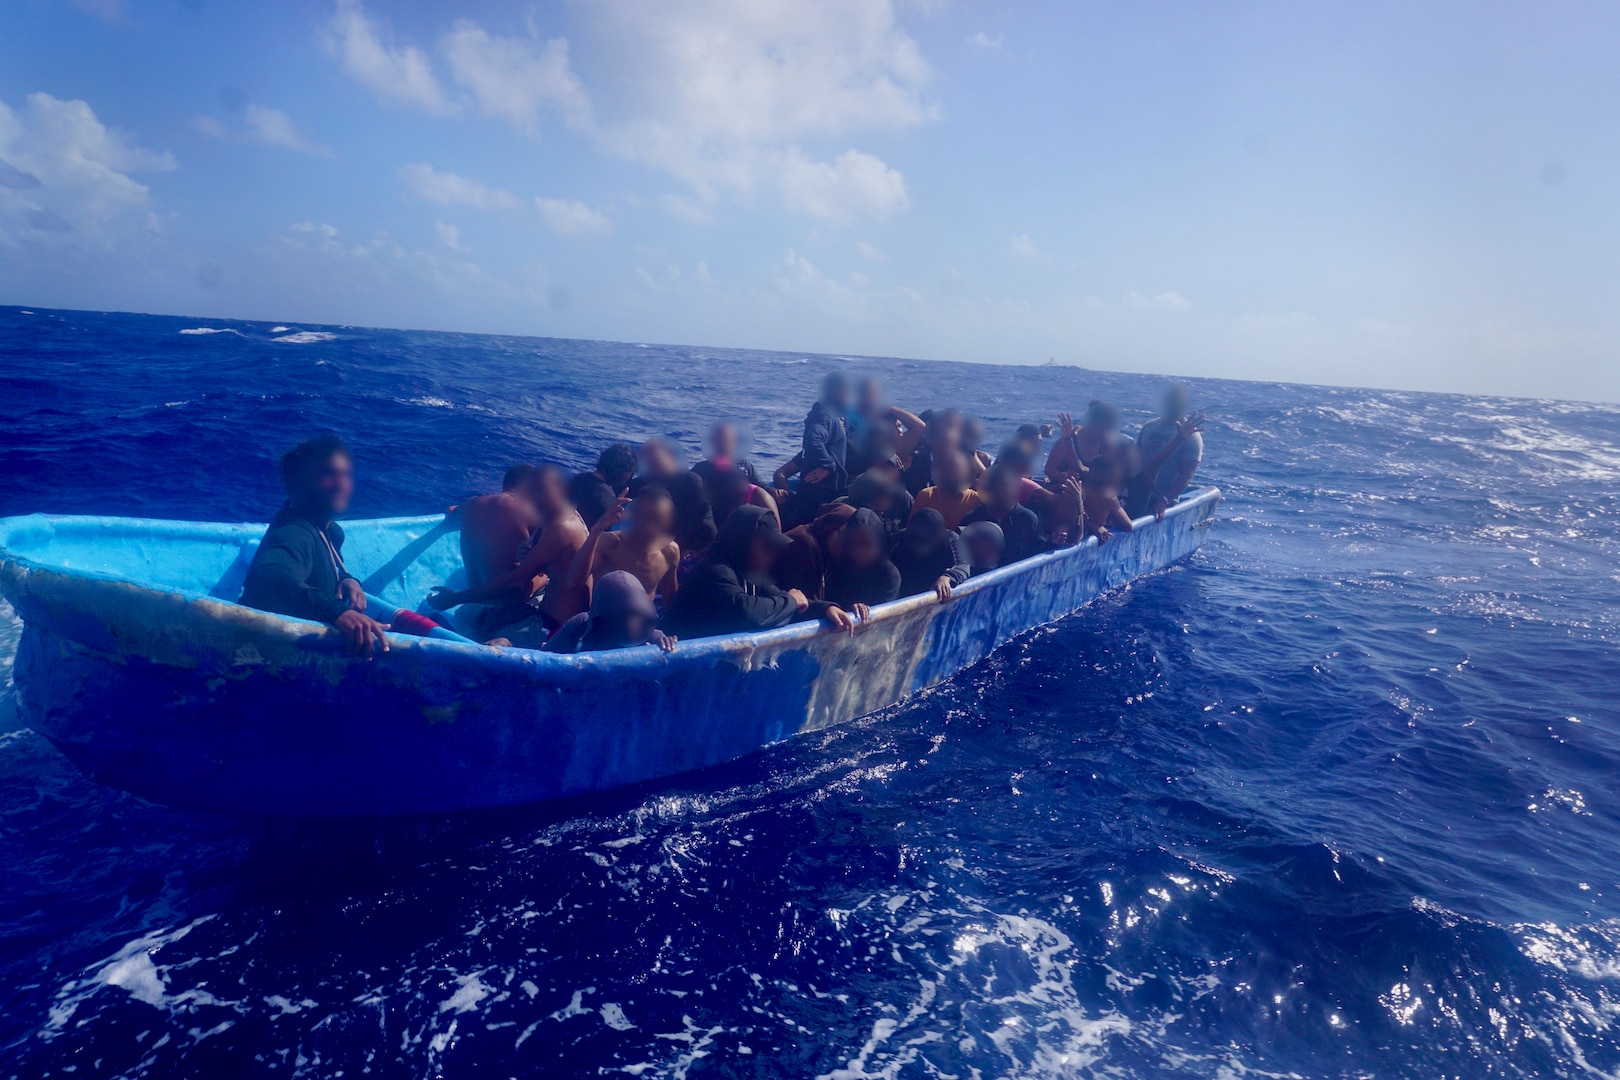 An unlawful irregular migration voyage vessel is interdicted by the Coast Guard Cutter Joseph Napier in Mona Passage waters west of Puerto Rico, Nov. 12, 2023.  Cutter Joseph Napier’s crew repatriated 34 migrants from this voyage to Punta Cana, Dominican Republic, Nov. 13, 2023. (U.S. Coast Guard photo)